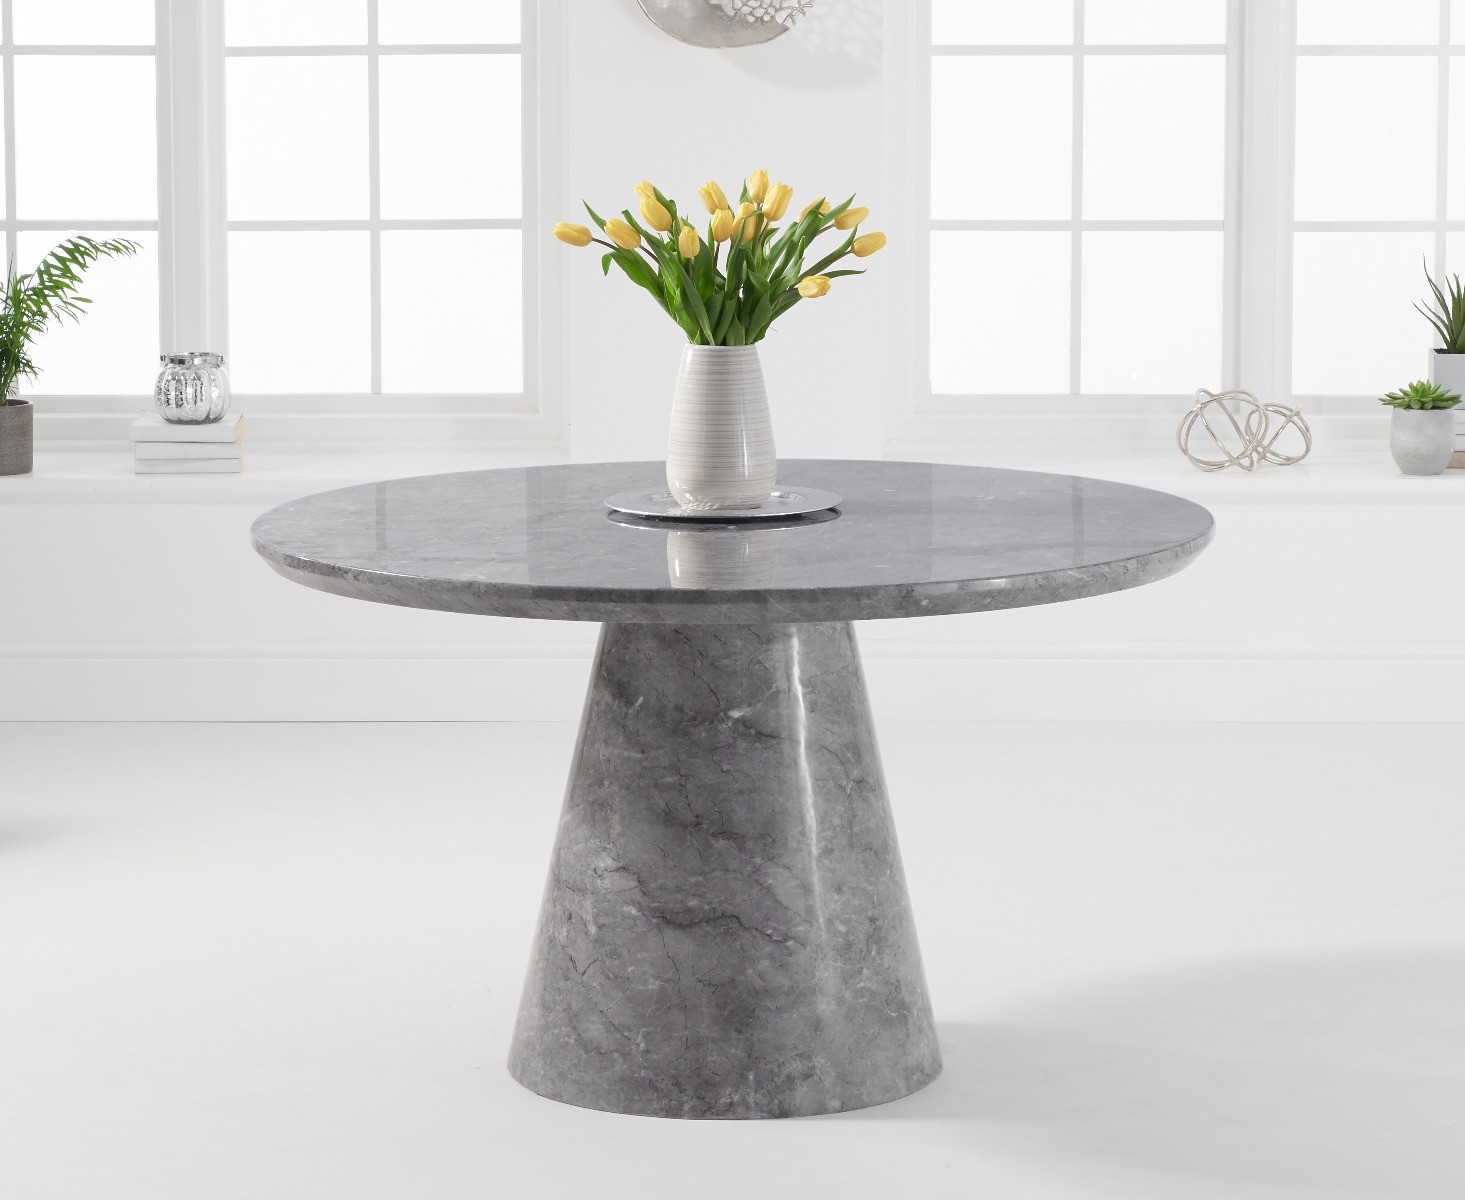 Photo 2 of Ravello 130cm round grey marble dining table with 4 grey sophia chairs